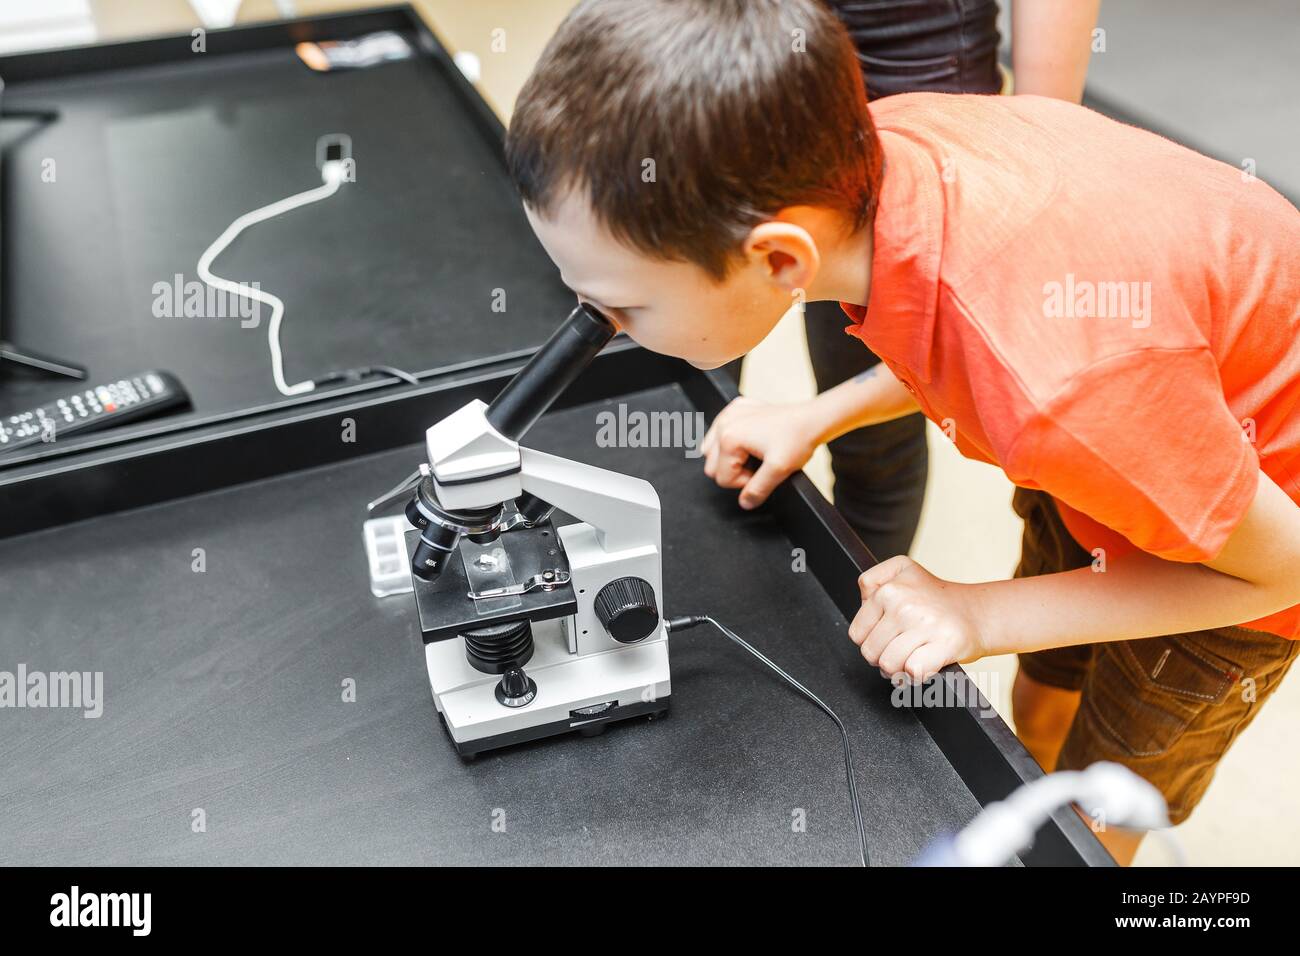 Boy in science class with electronic microscope, education concept Stock Photo